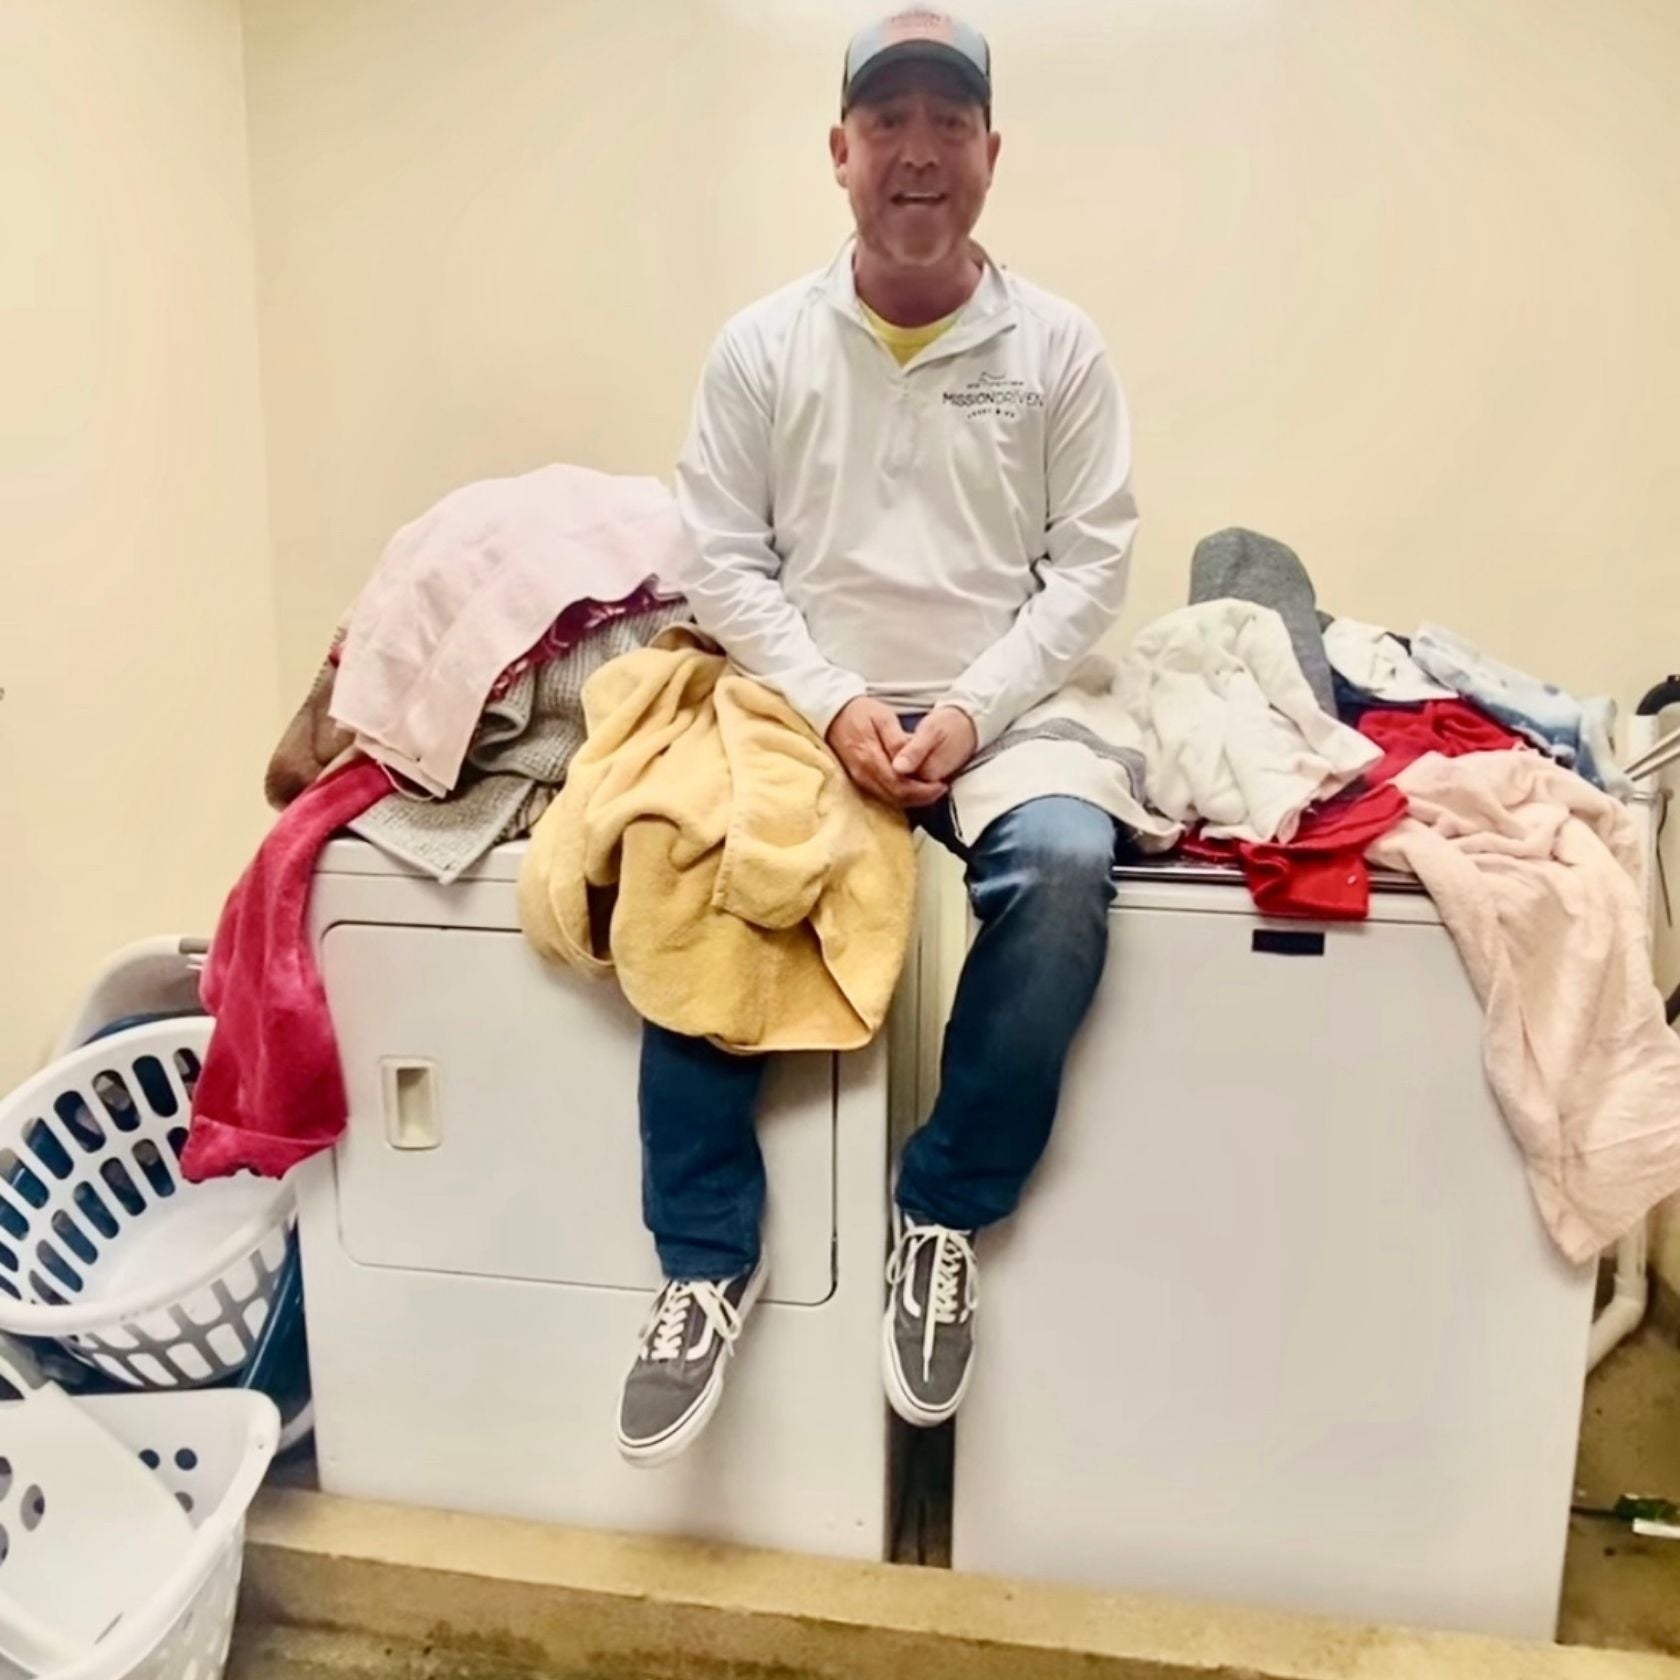 8000 Raised in 4 Days for Washer & Dryer